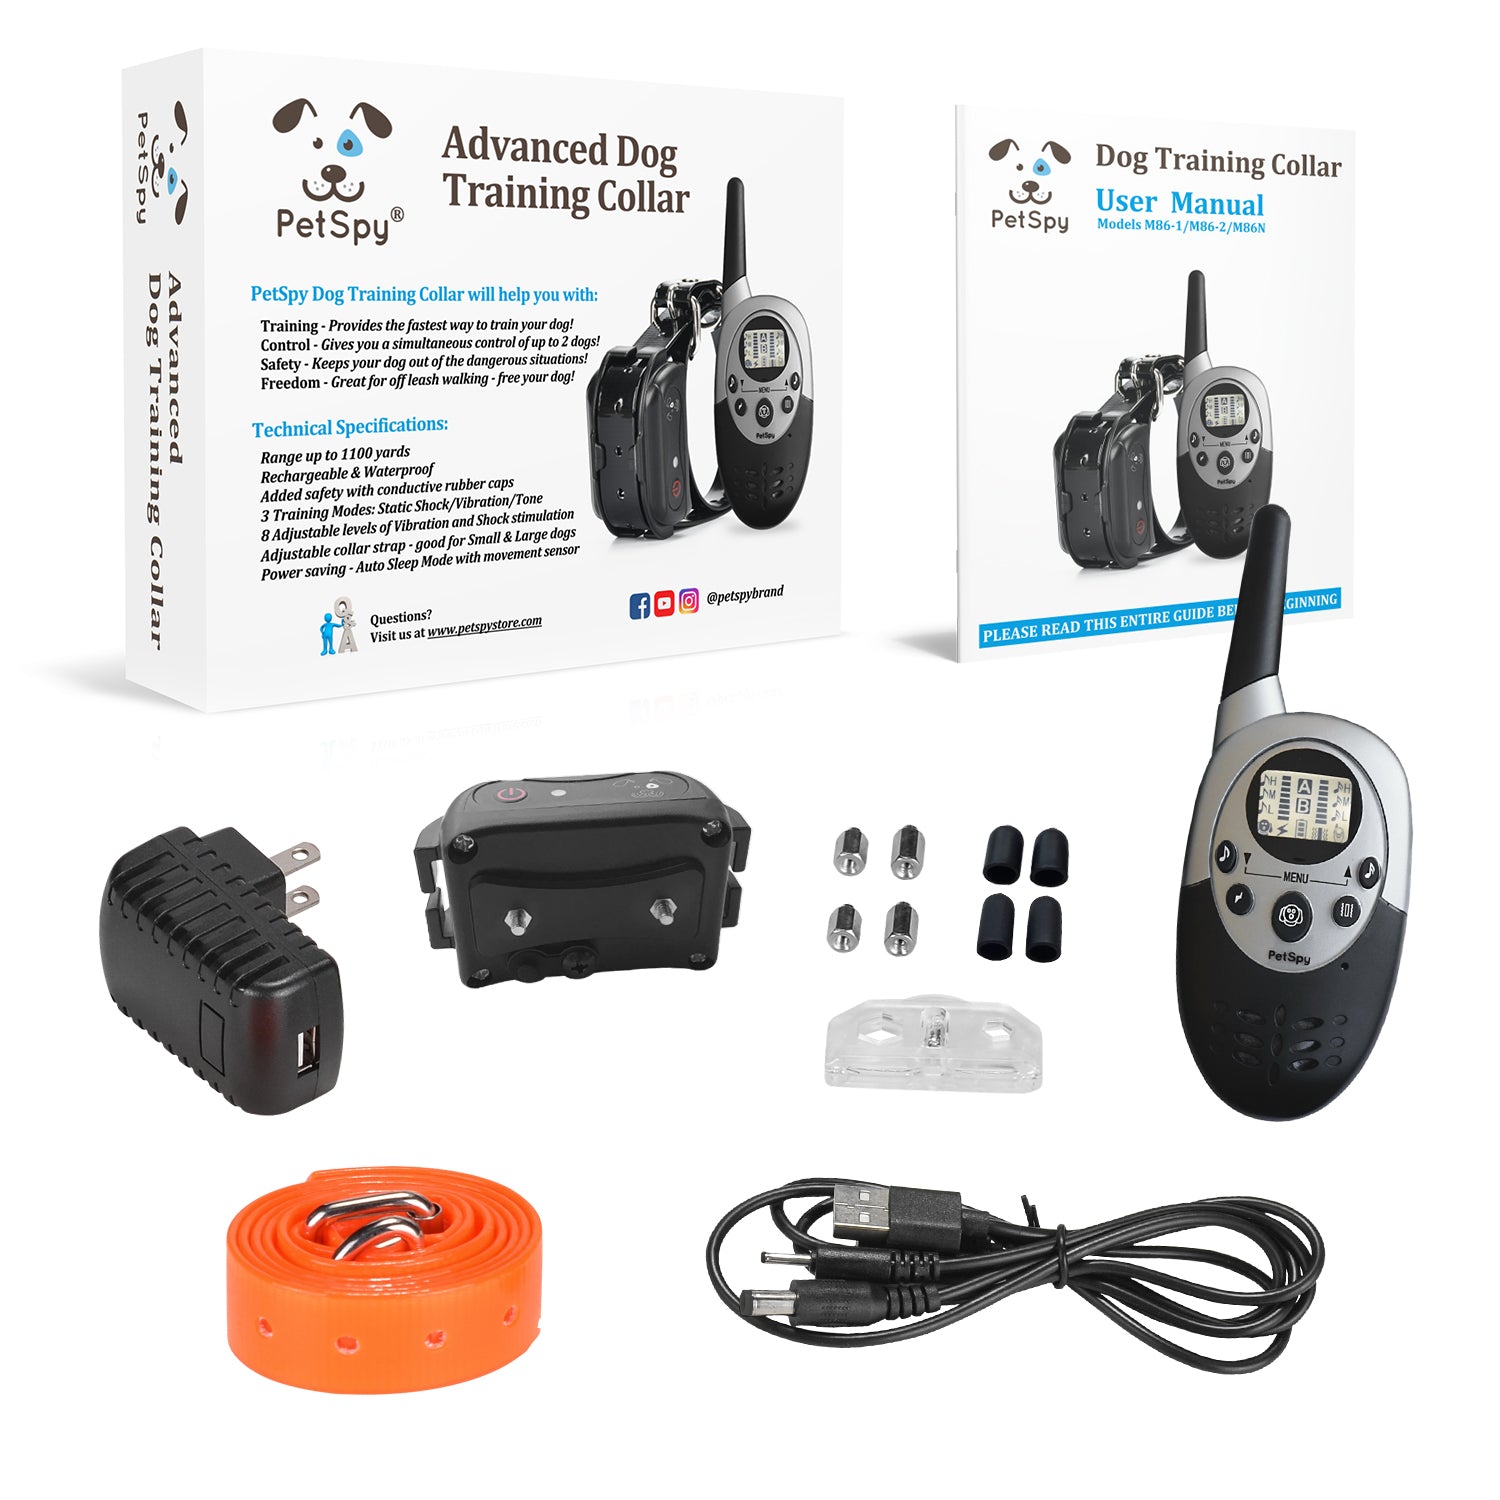 Included_Remote Transmitter_Collar Receiver_Adjustable TPU Strap_Dual USB Charger_Test Bulb_Set of Metal Probes_User Guide